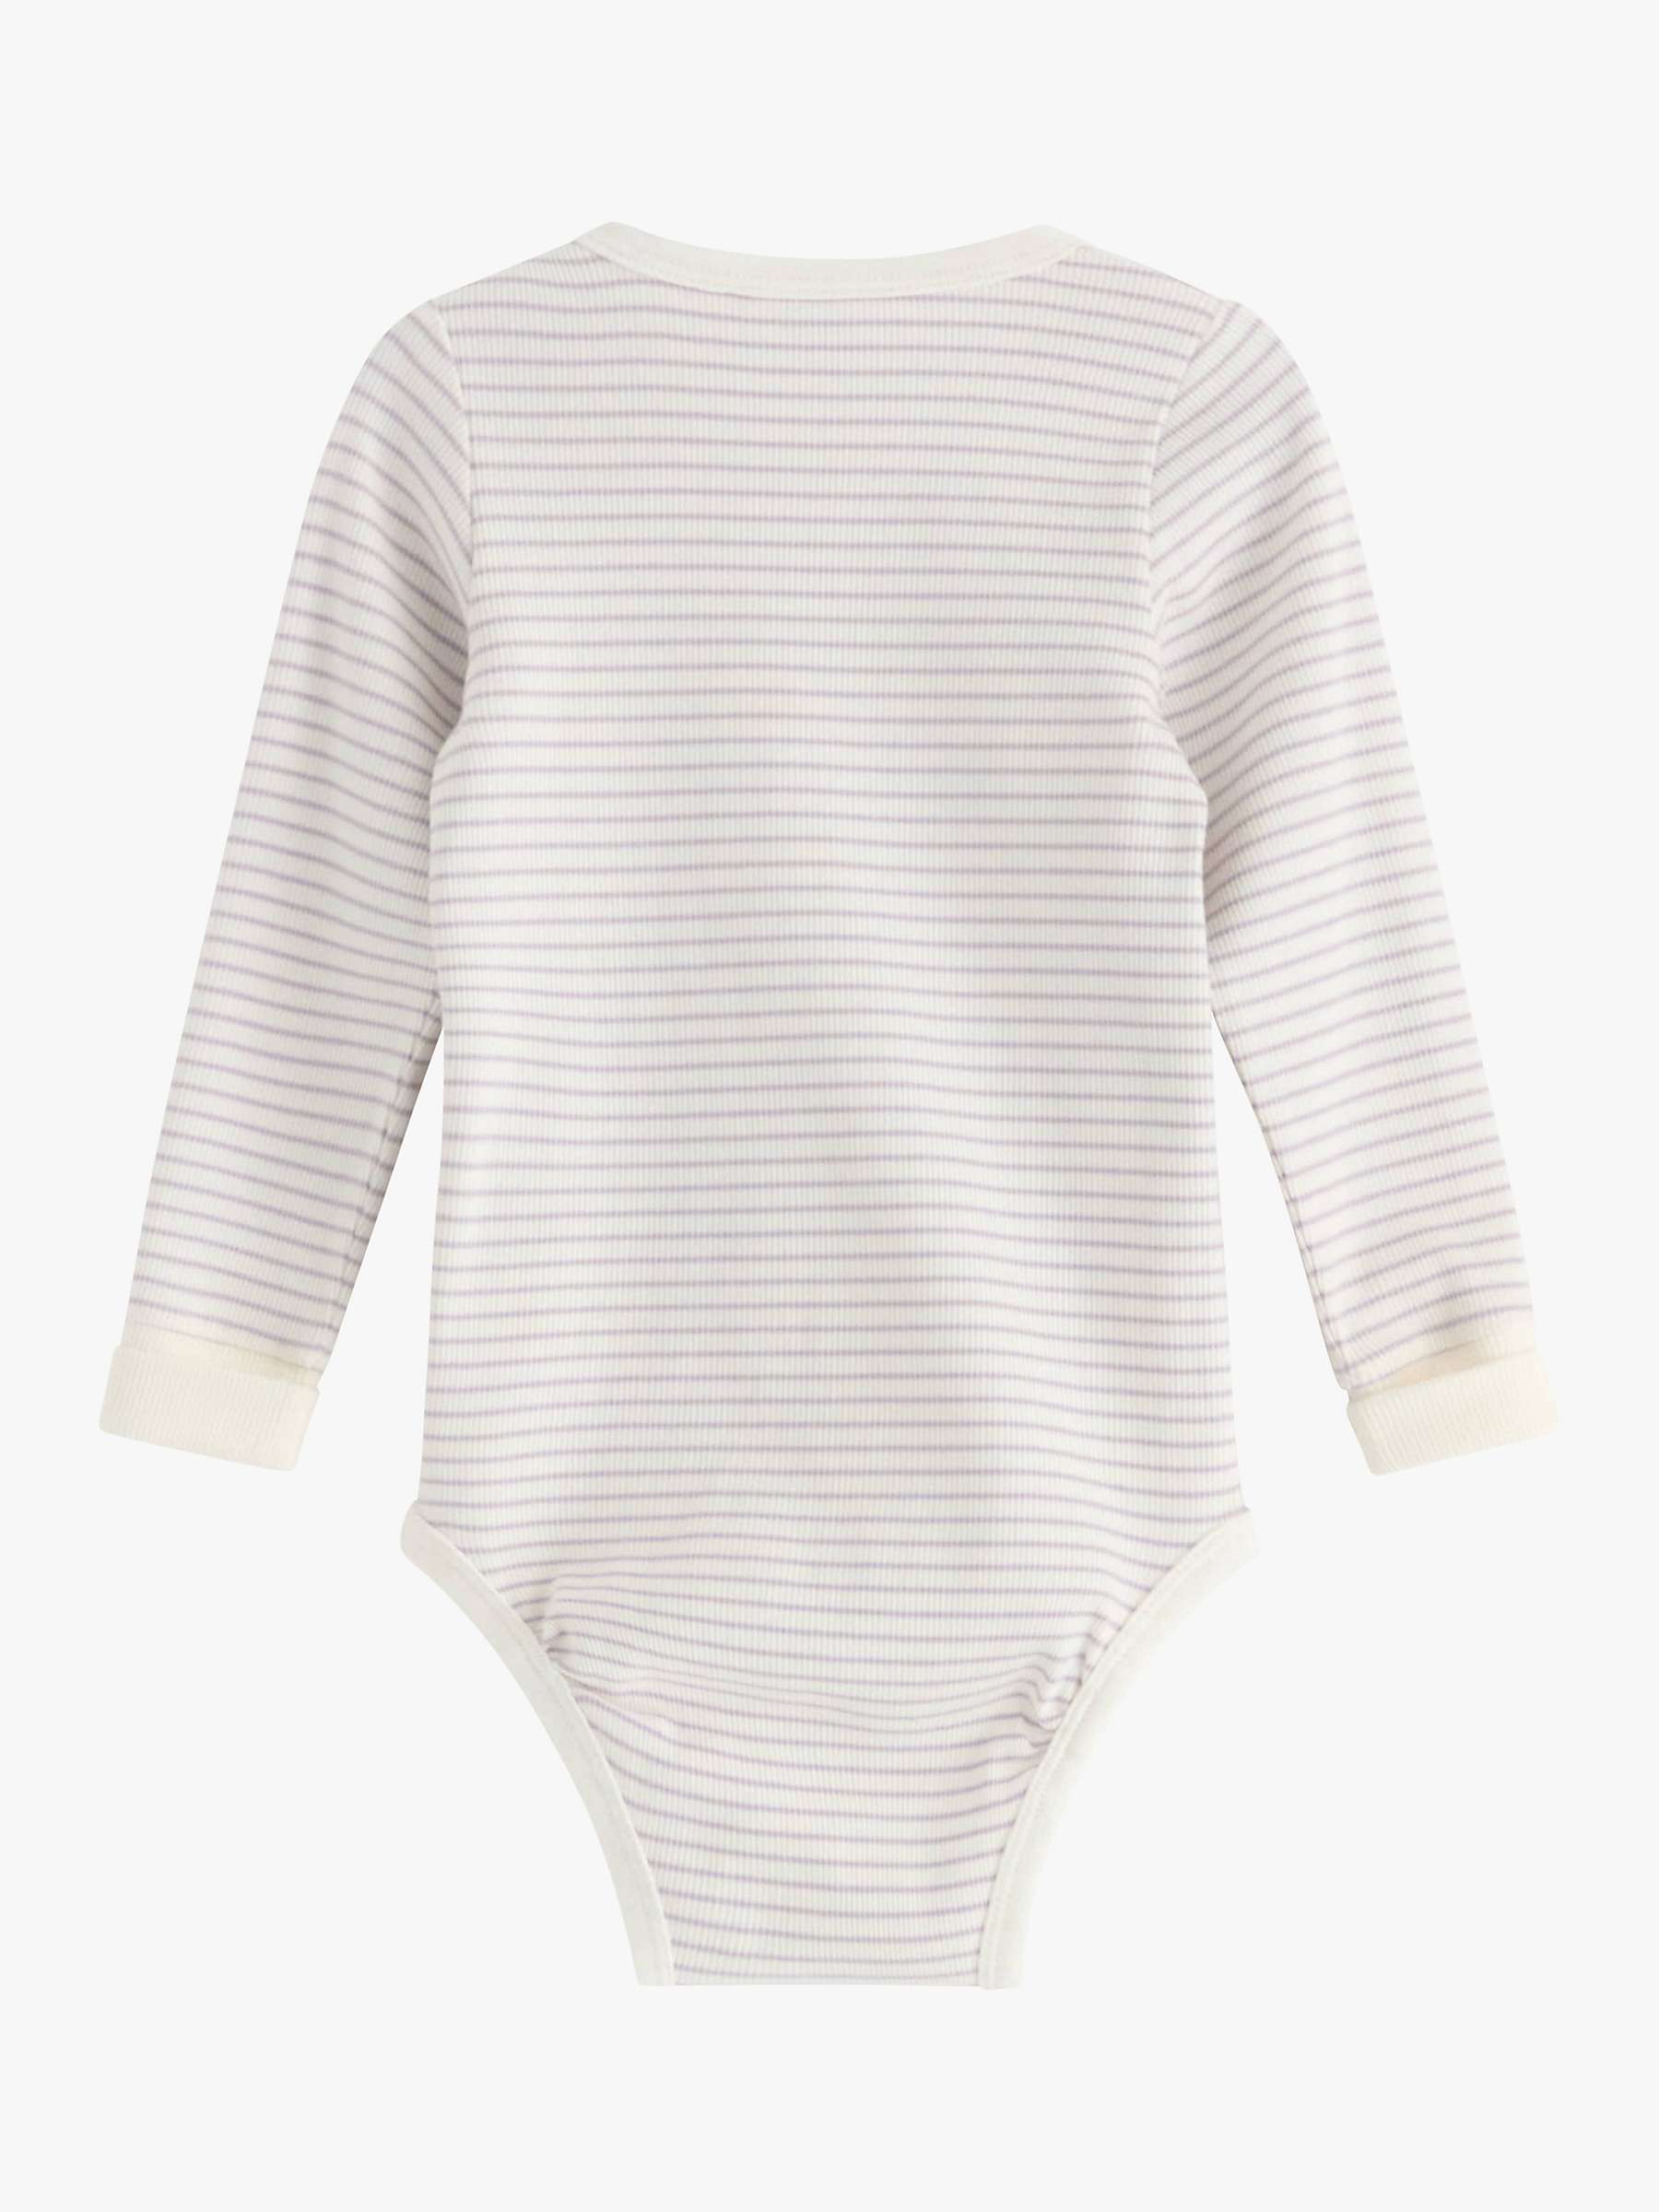 Buy Lindex Baby Organic Cotton Blend Ribbed Stripe Bodysuit, Light Dusty Lilac Online at johnlewis.com